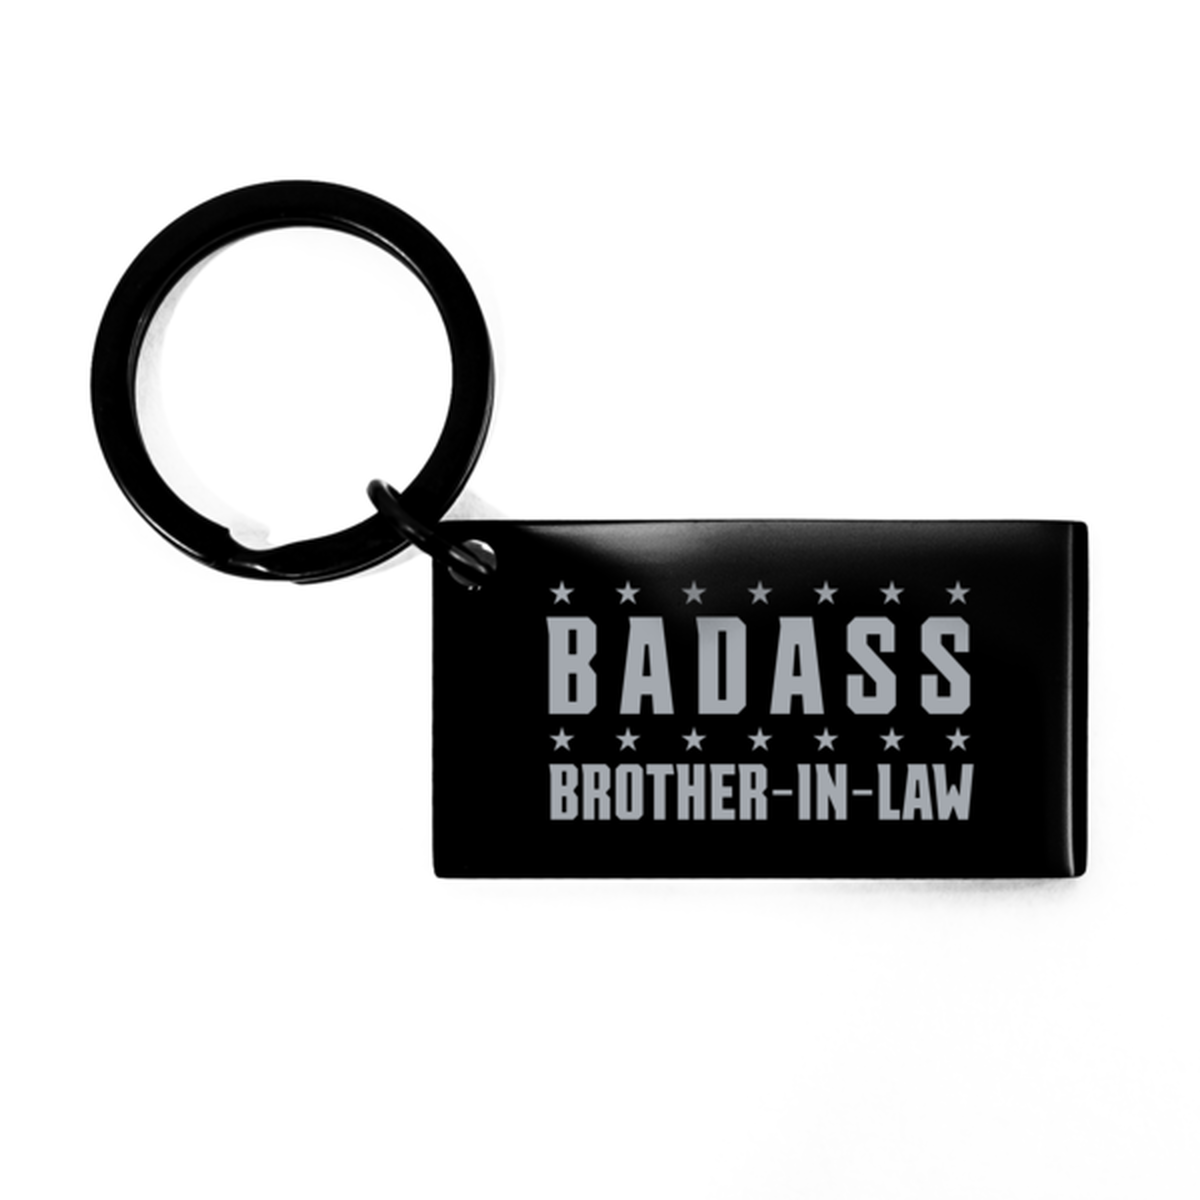 Brother-in-law Black Keychain, Badass Brother-in-law, Funny Family Gifts  Keyring For Brother-in-law From Brother Sister